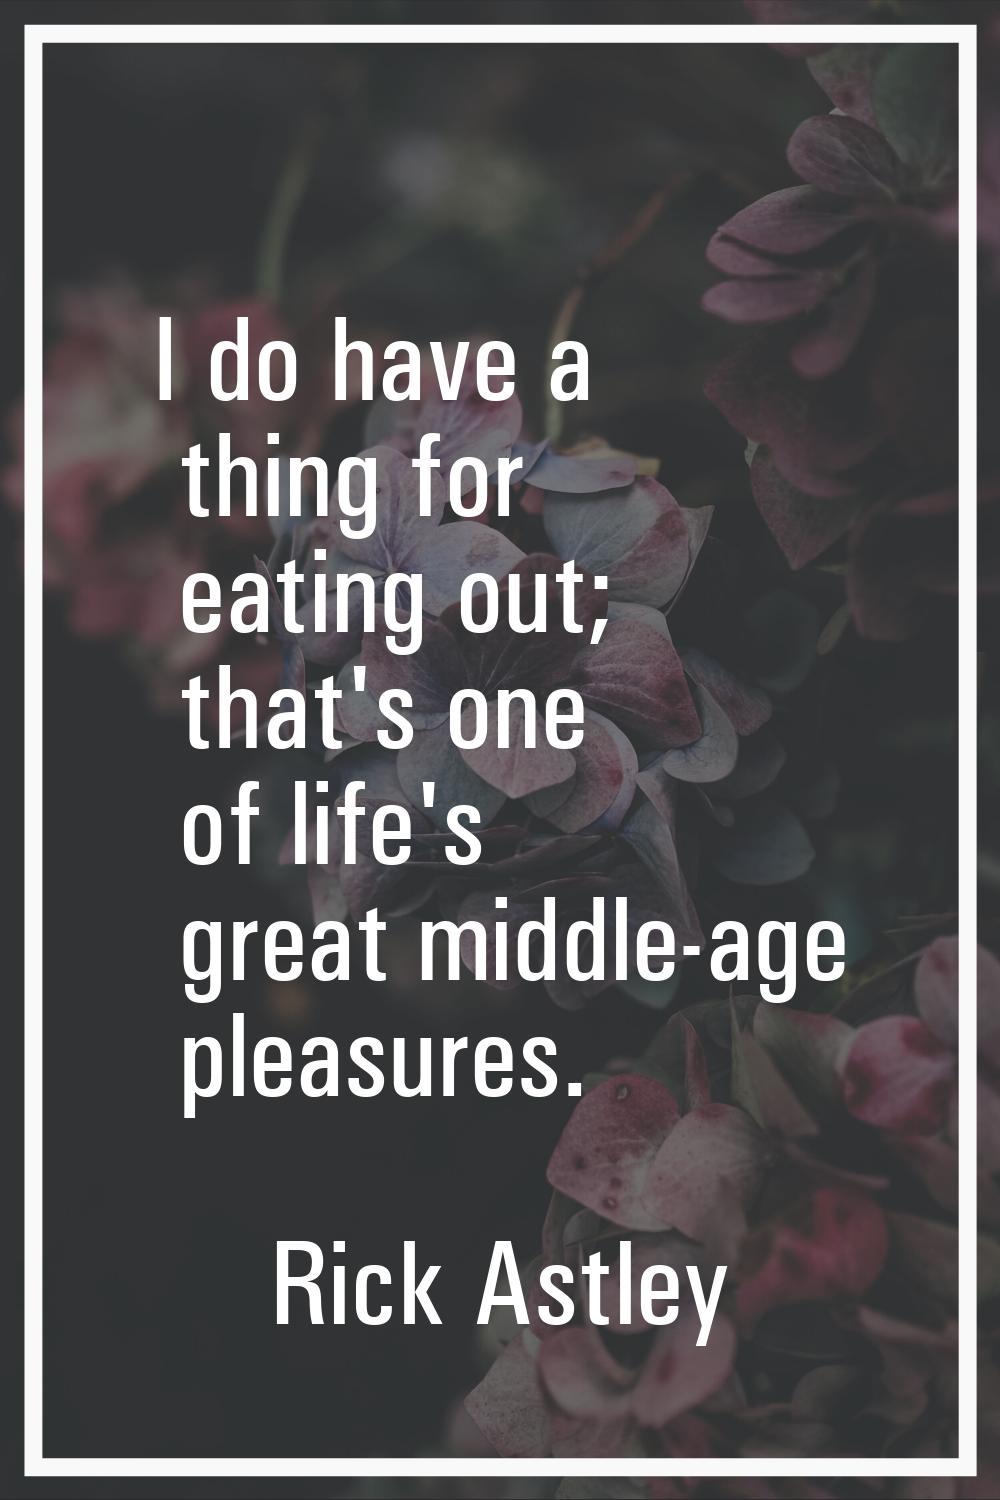 I do have a thing for eating out; that's one of life's great middle-age pleasures.